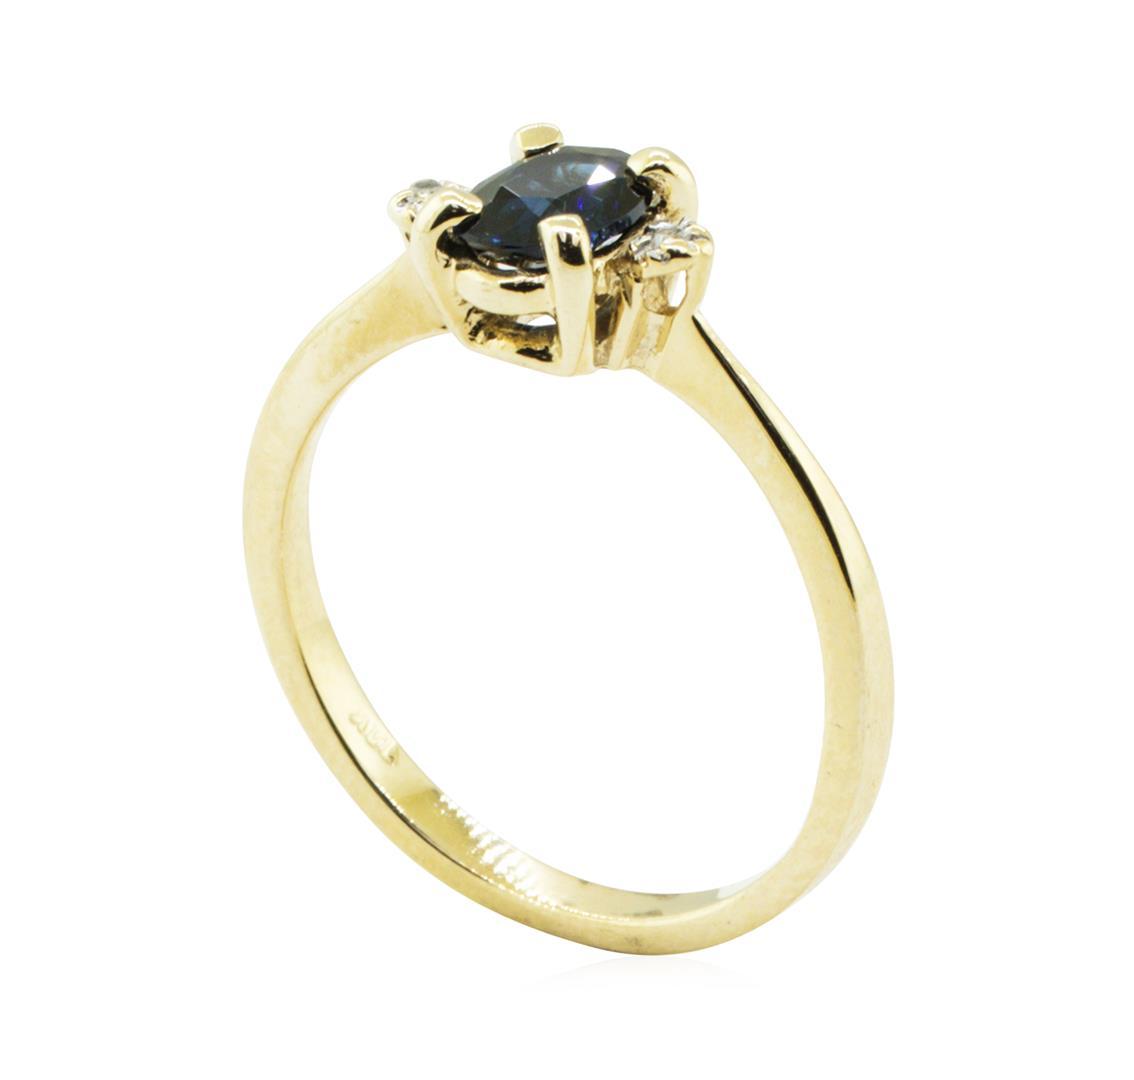 0.69 ctw Blue Sapphire and Diamond Ring - 14KT Yellow Gold